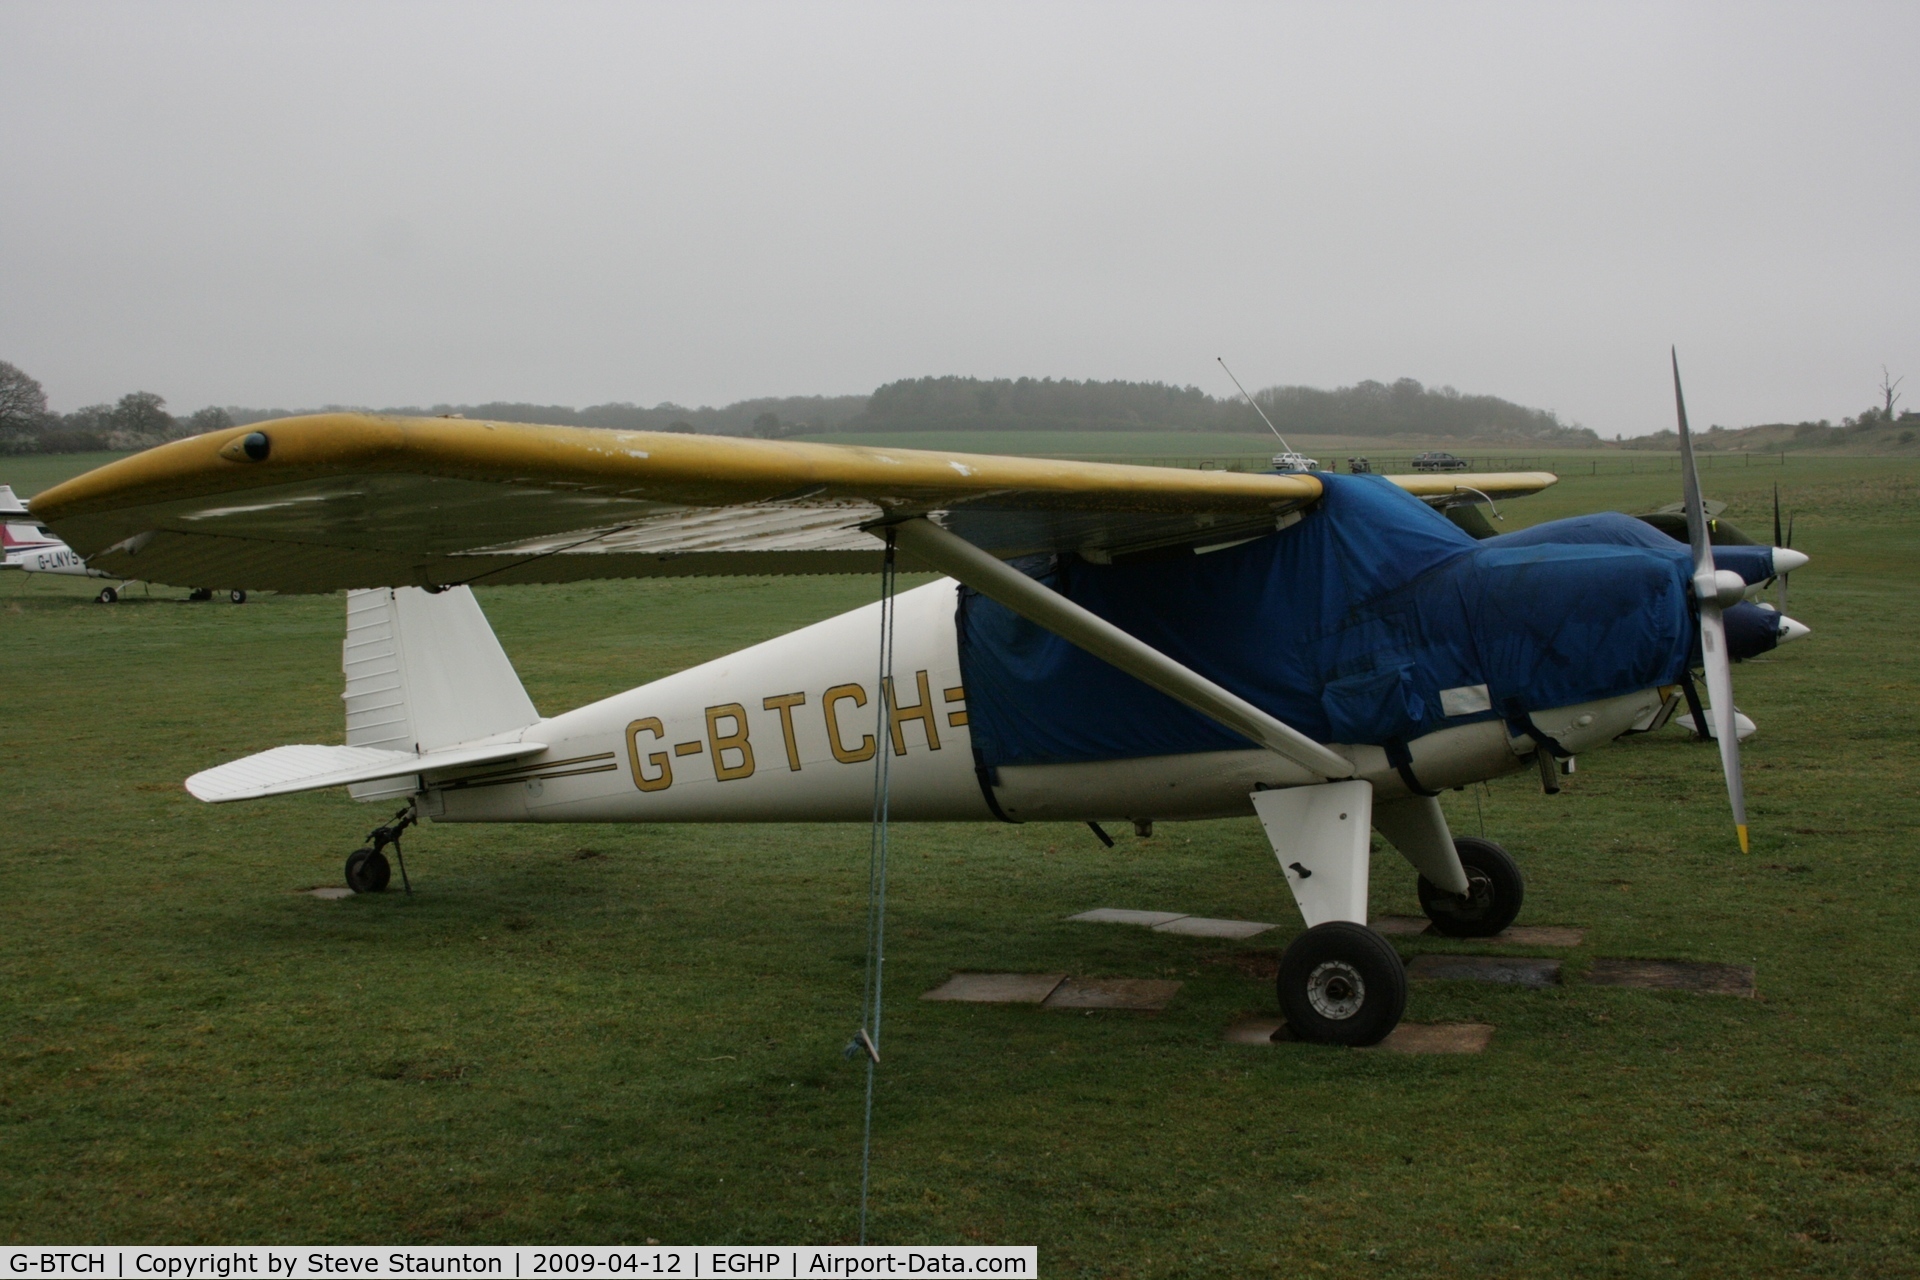 G-BTCH, 1948 Luscombe 8E Silvaire C/N 6403, Taken at Popham Airfield, England on a gloomy April Sunday (12/04/09)